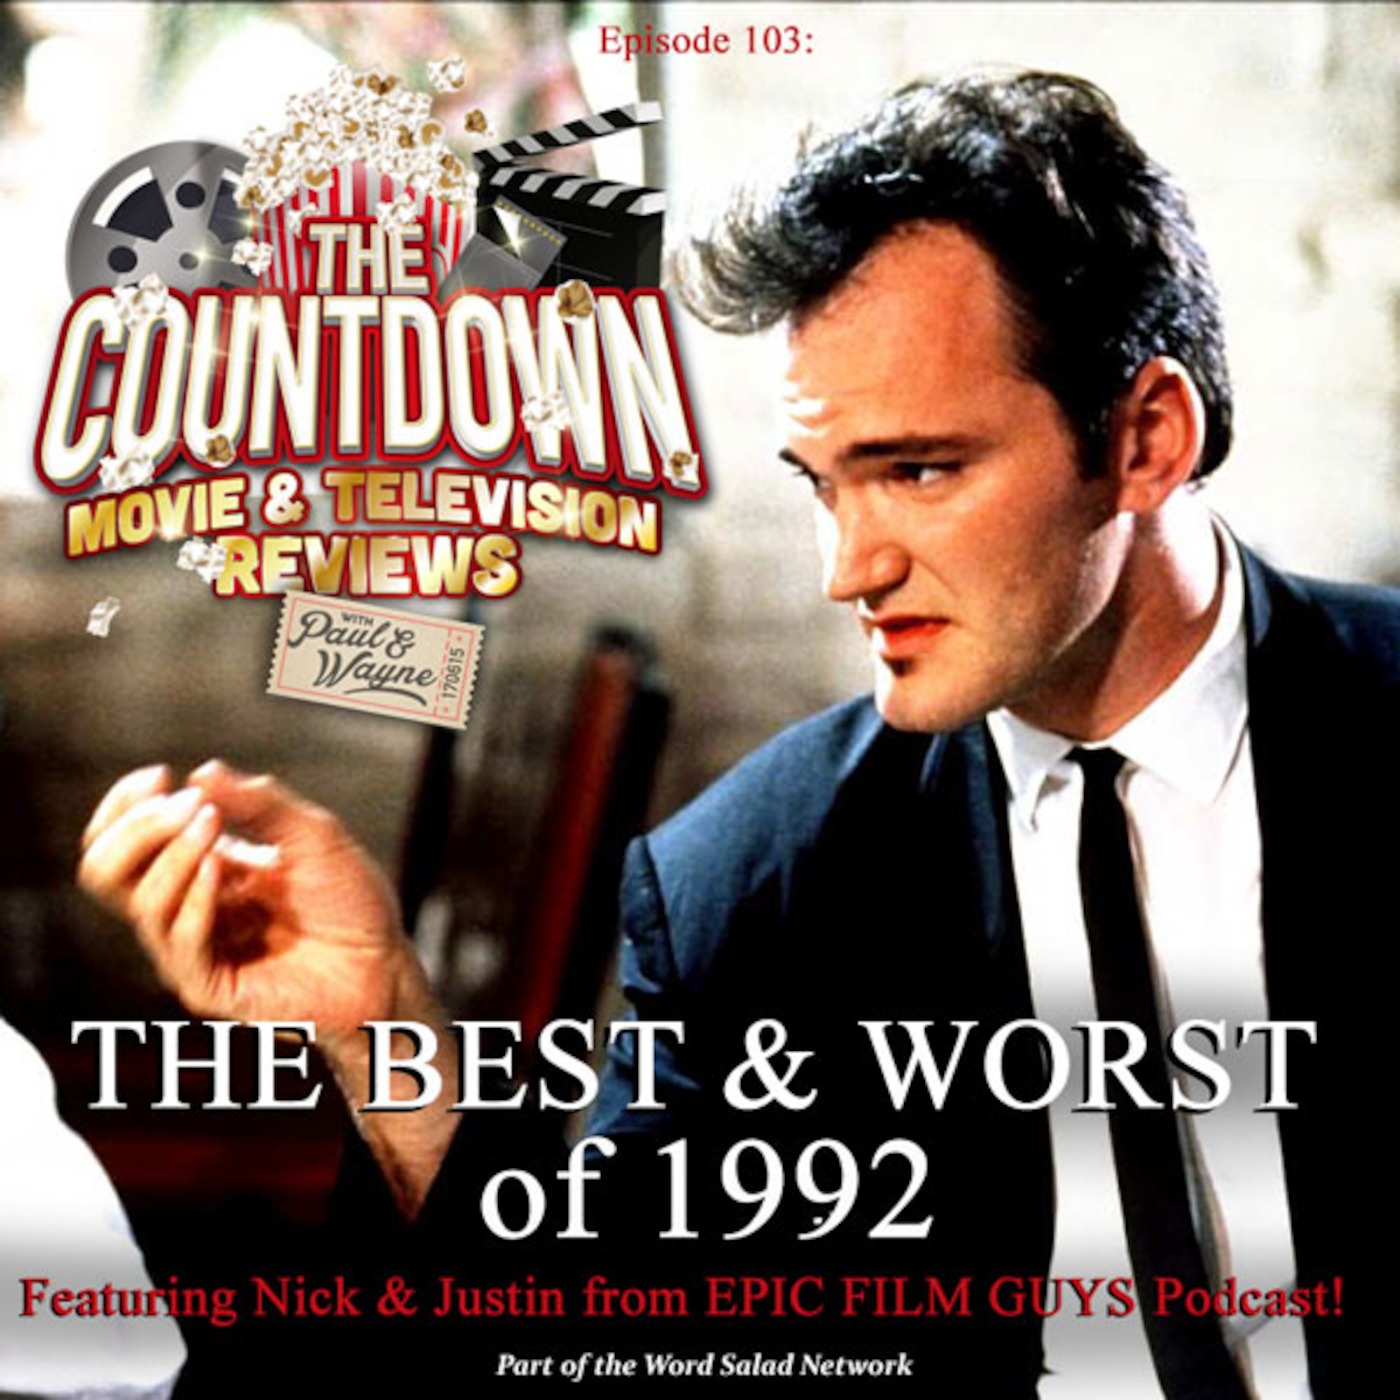 Episode 103: The Best & Worst 0f 1992 (w/ The Epic Film Guys)